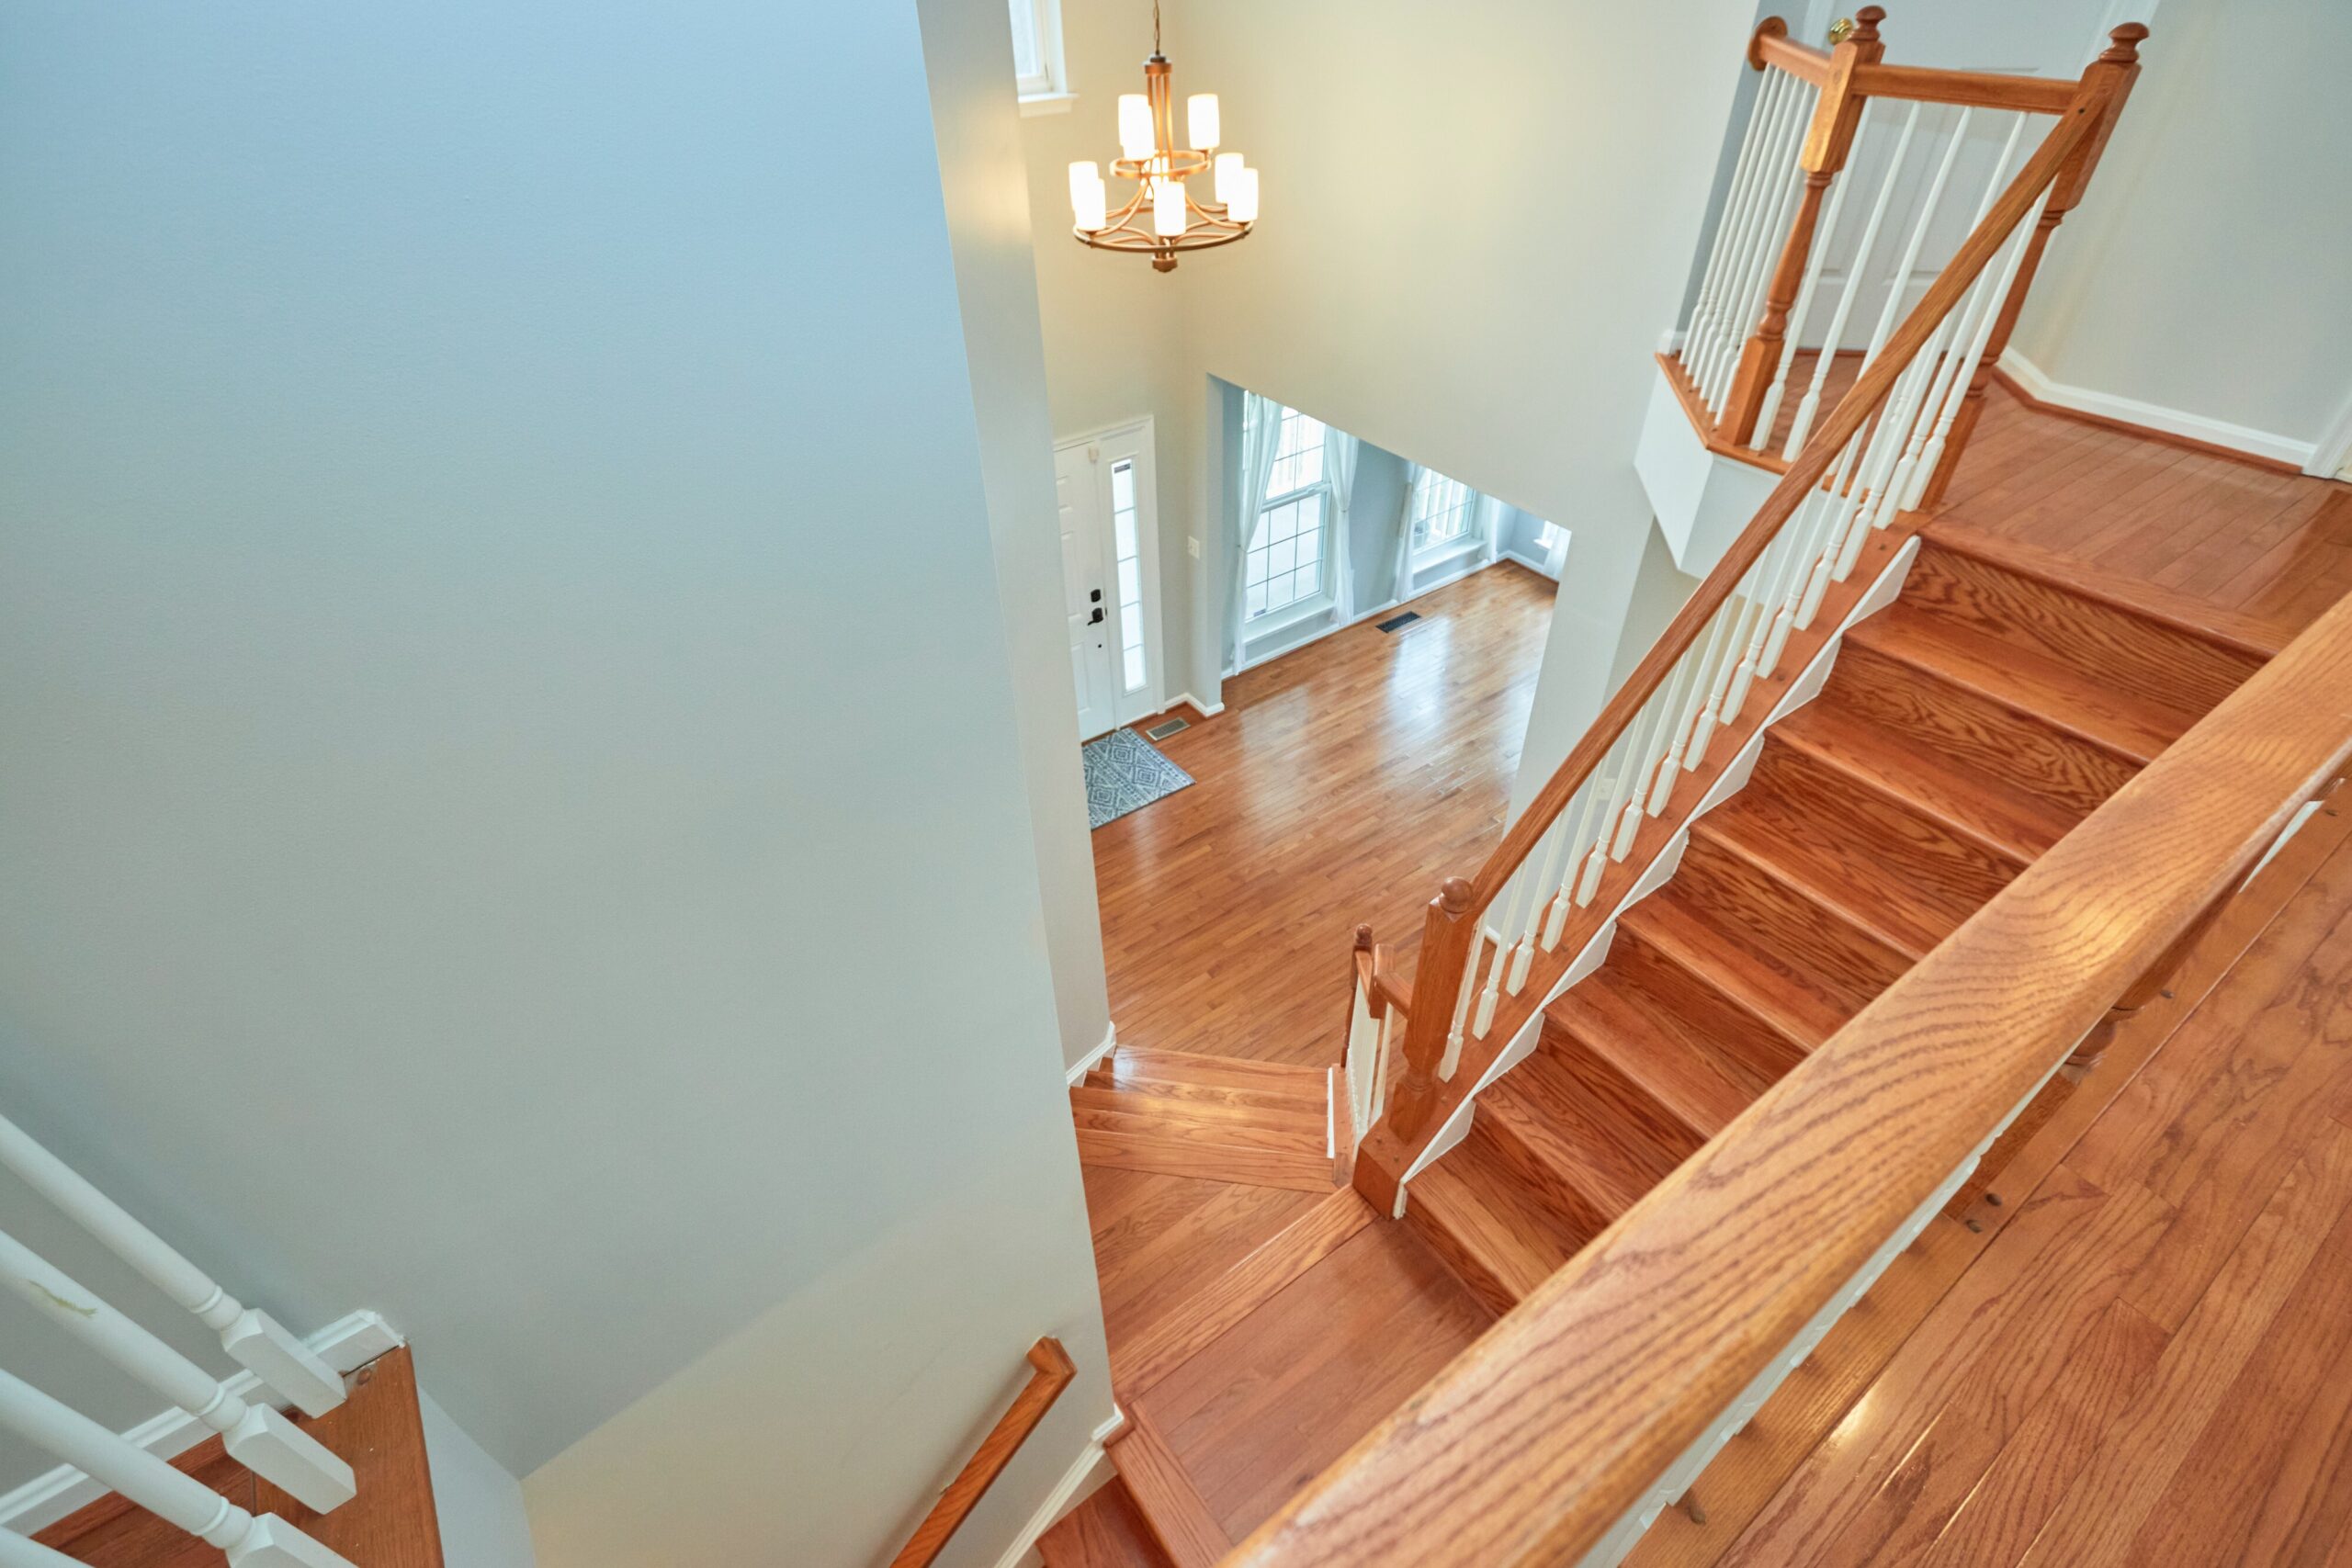 Professional interior photo of 80 Brentsmill Drive in Stafford, Virginia - showing the view from the top floor looking down the staircase toward the front call. All hardwood floors.